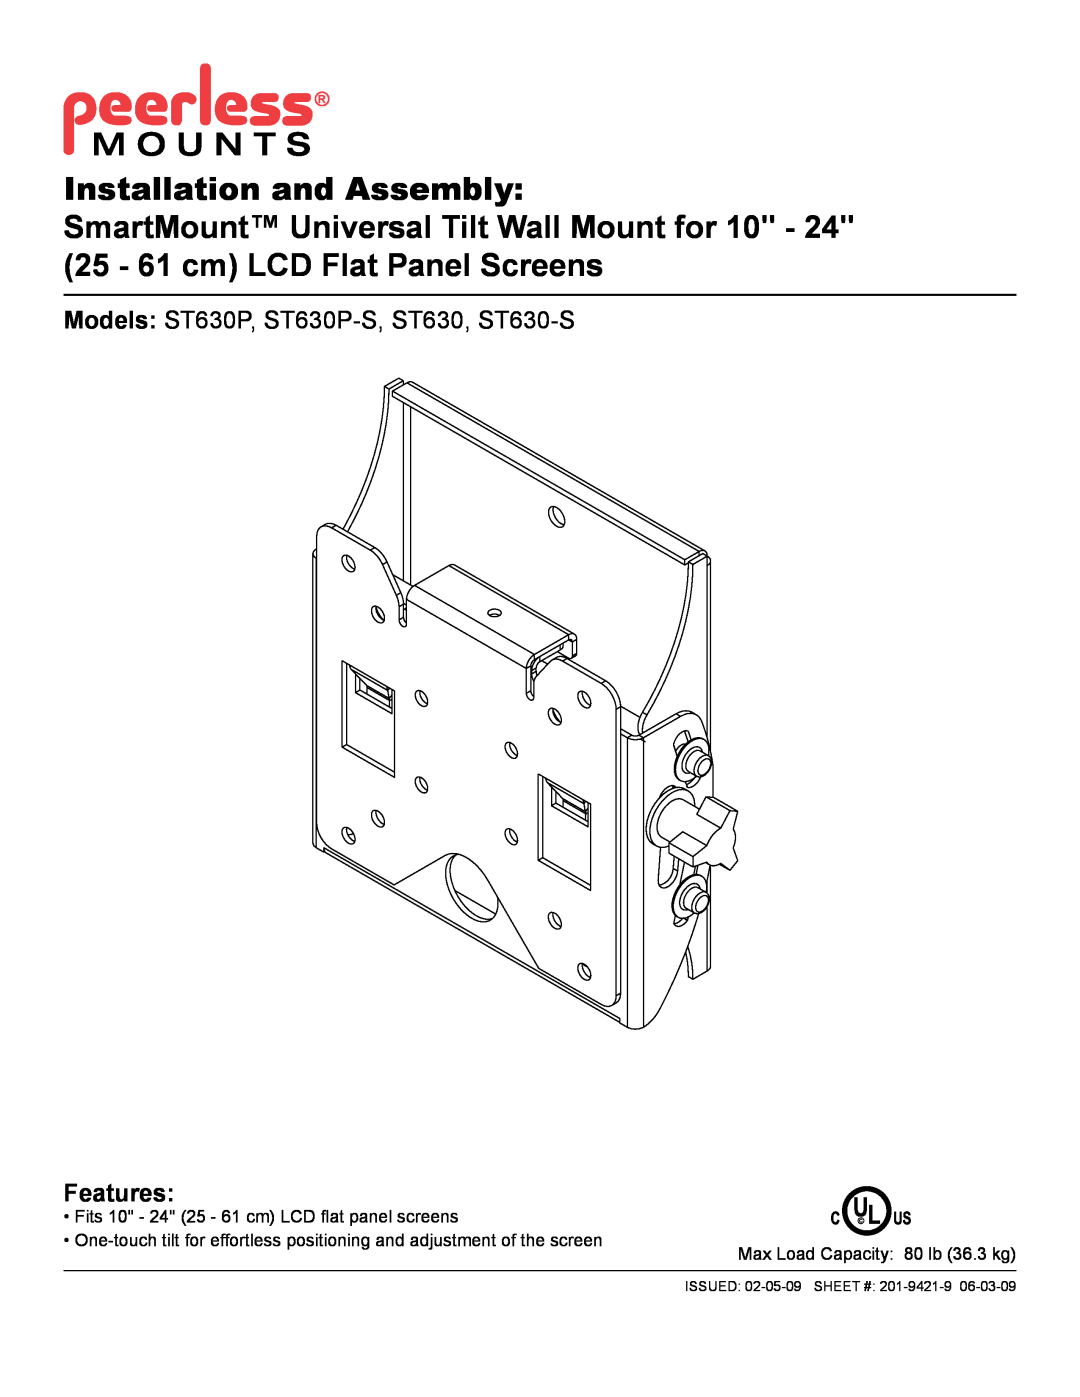 Peerless Industries ST630P-S manual Features, Models ST 630P, ST 630P-S,ST 630, ST 630-S, ISSUED 04-27-05SHEET # 